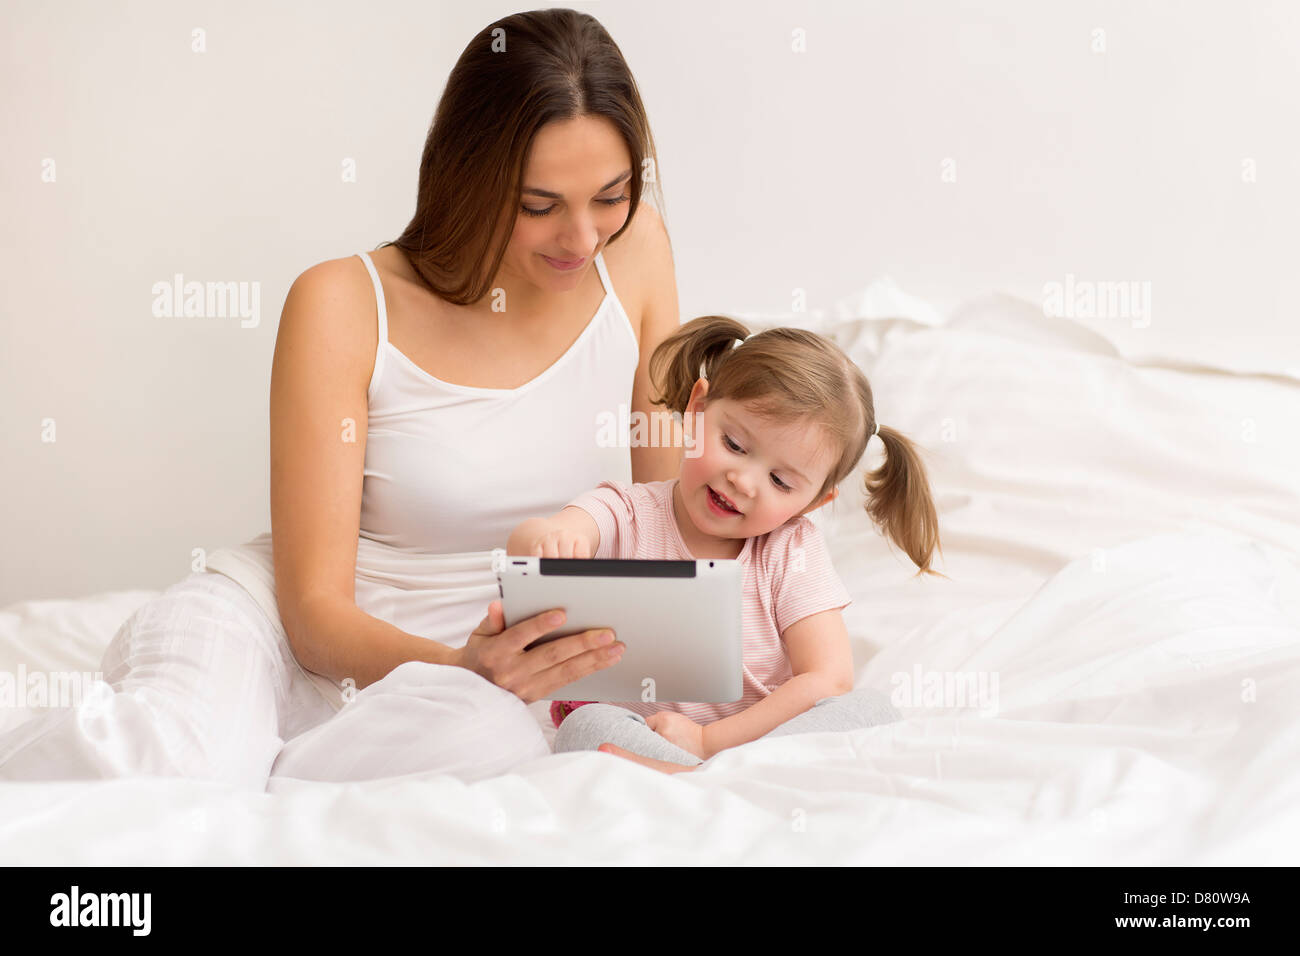 little girl playing tablet with her mom in the white bedroom Stock Photo